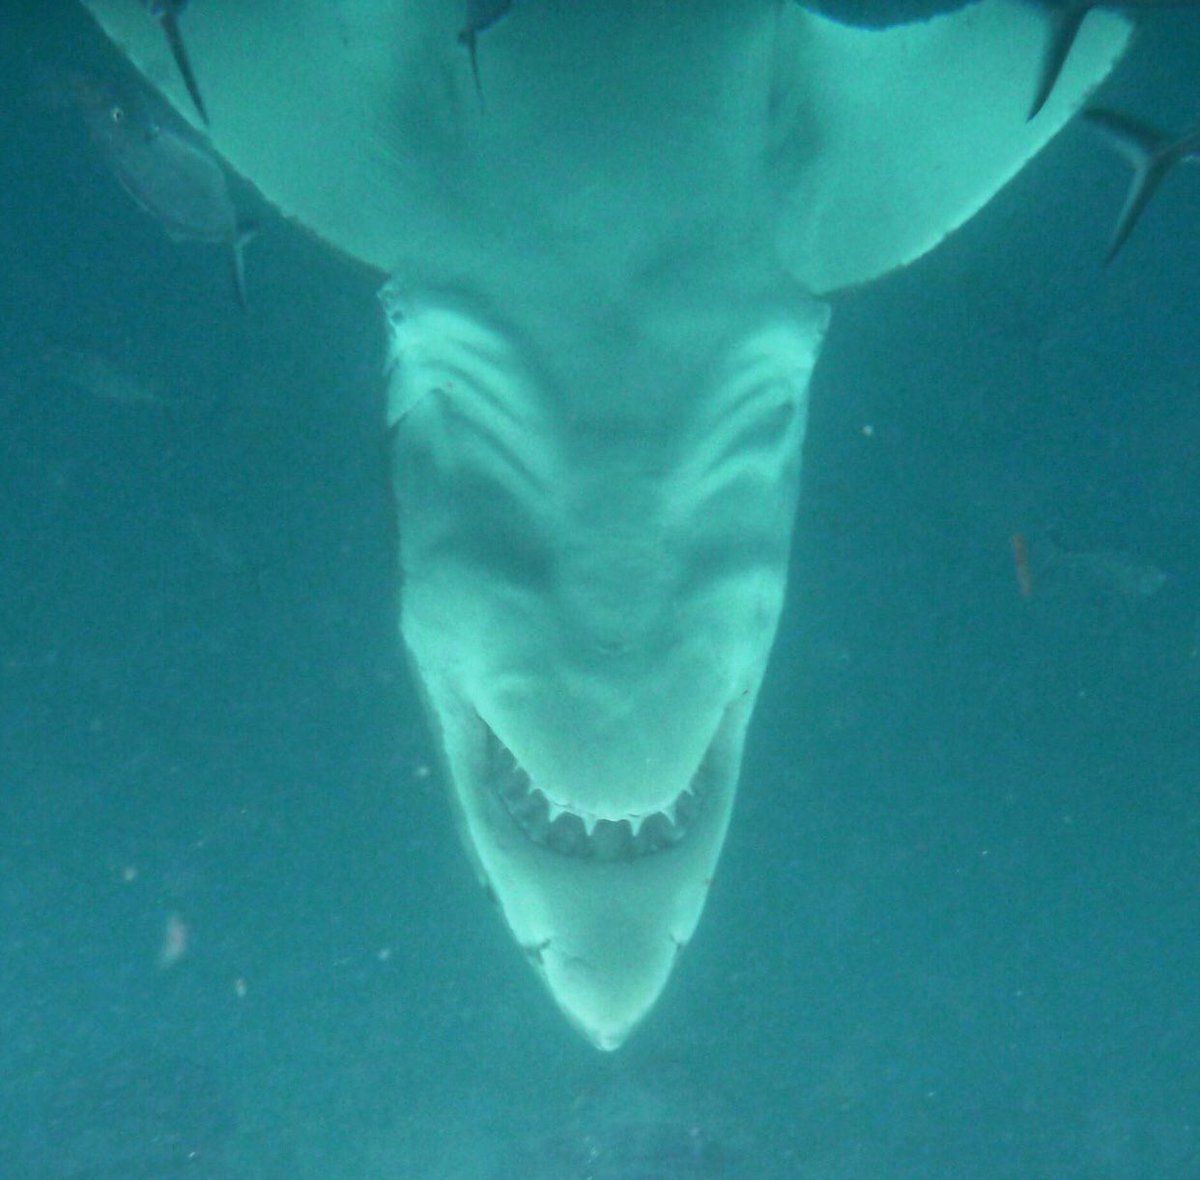 Upside down Great White sharks